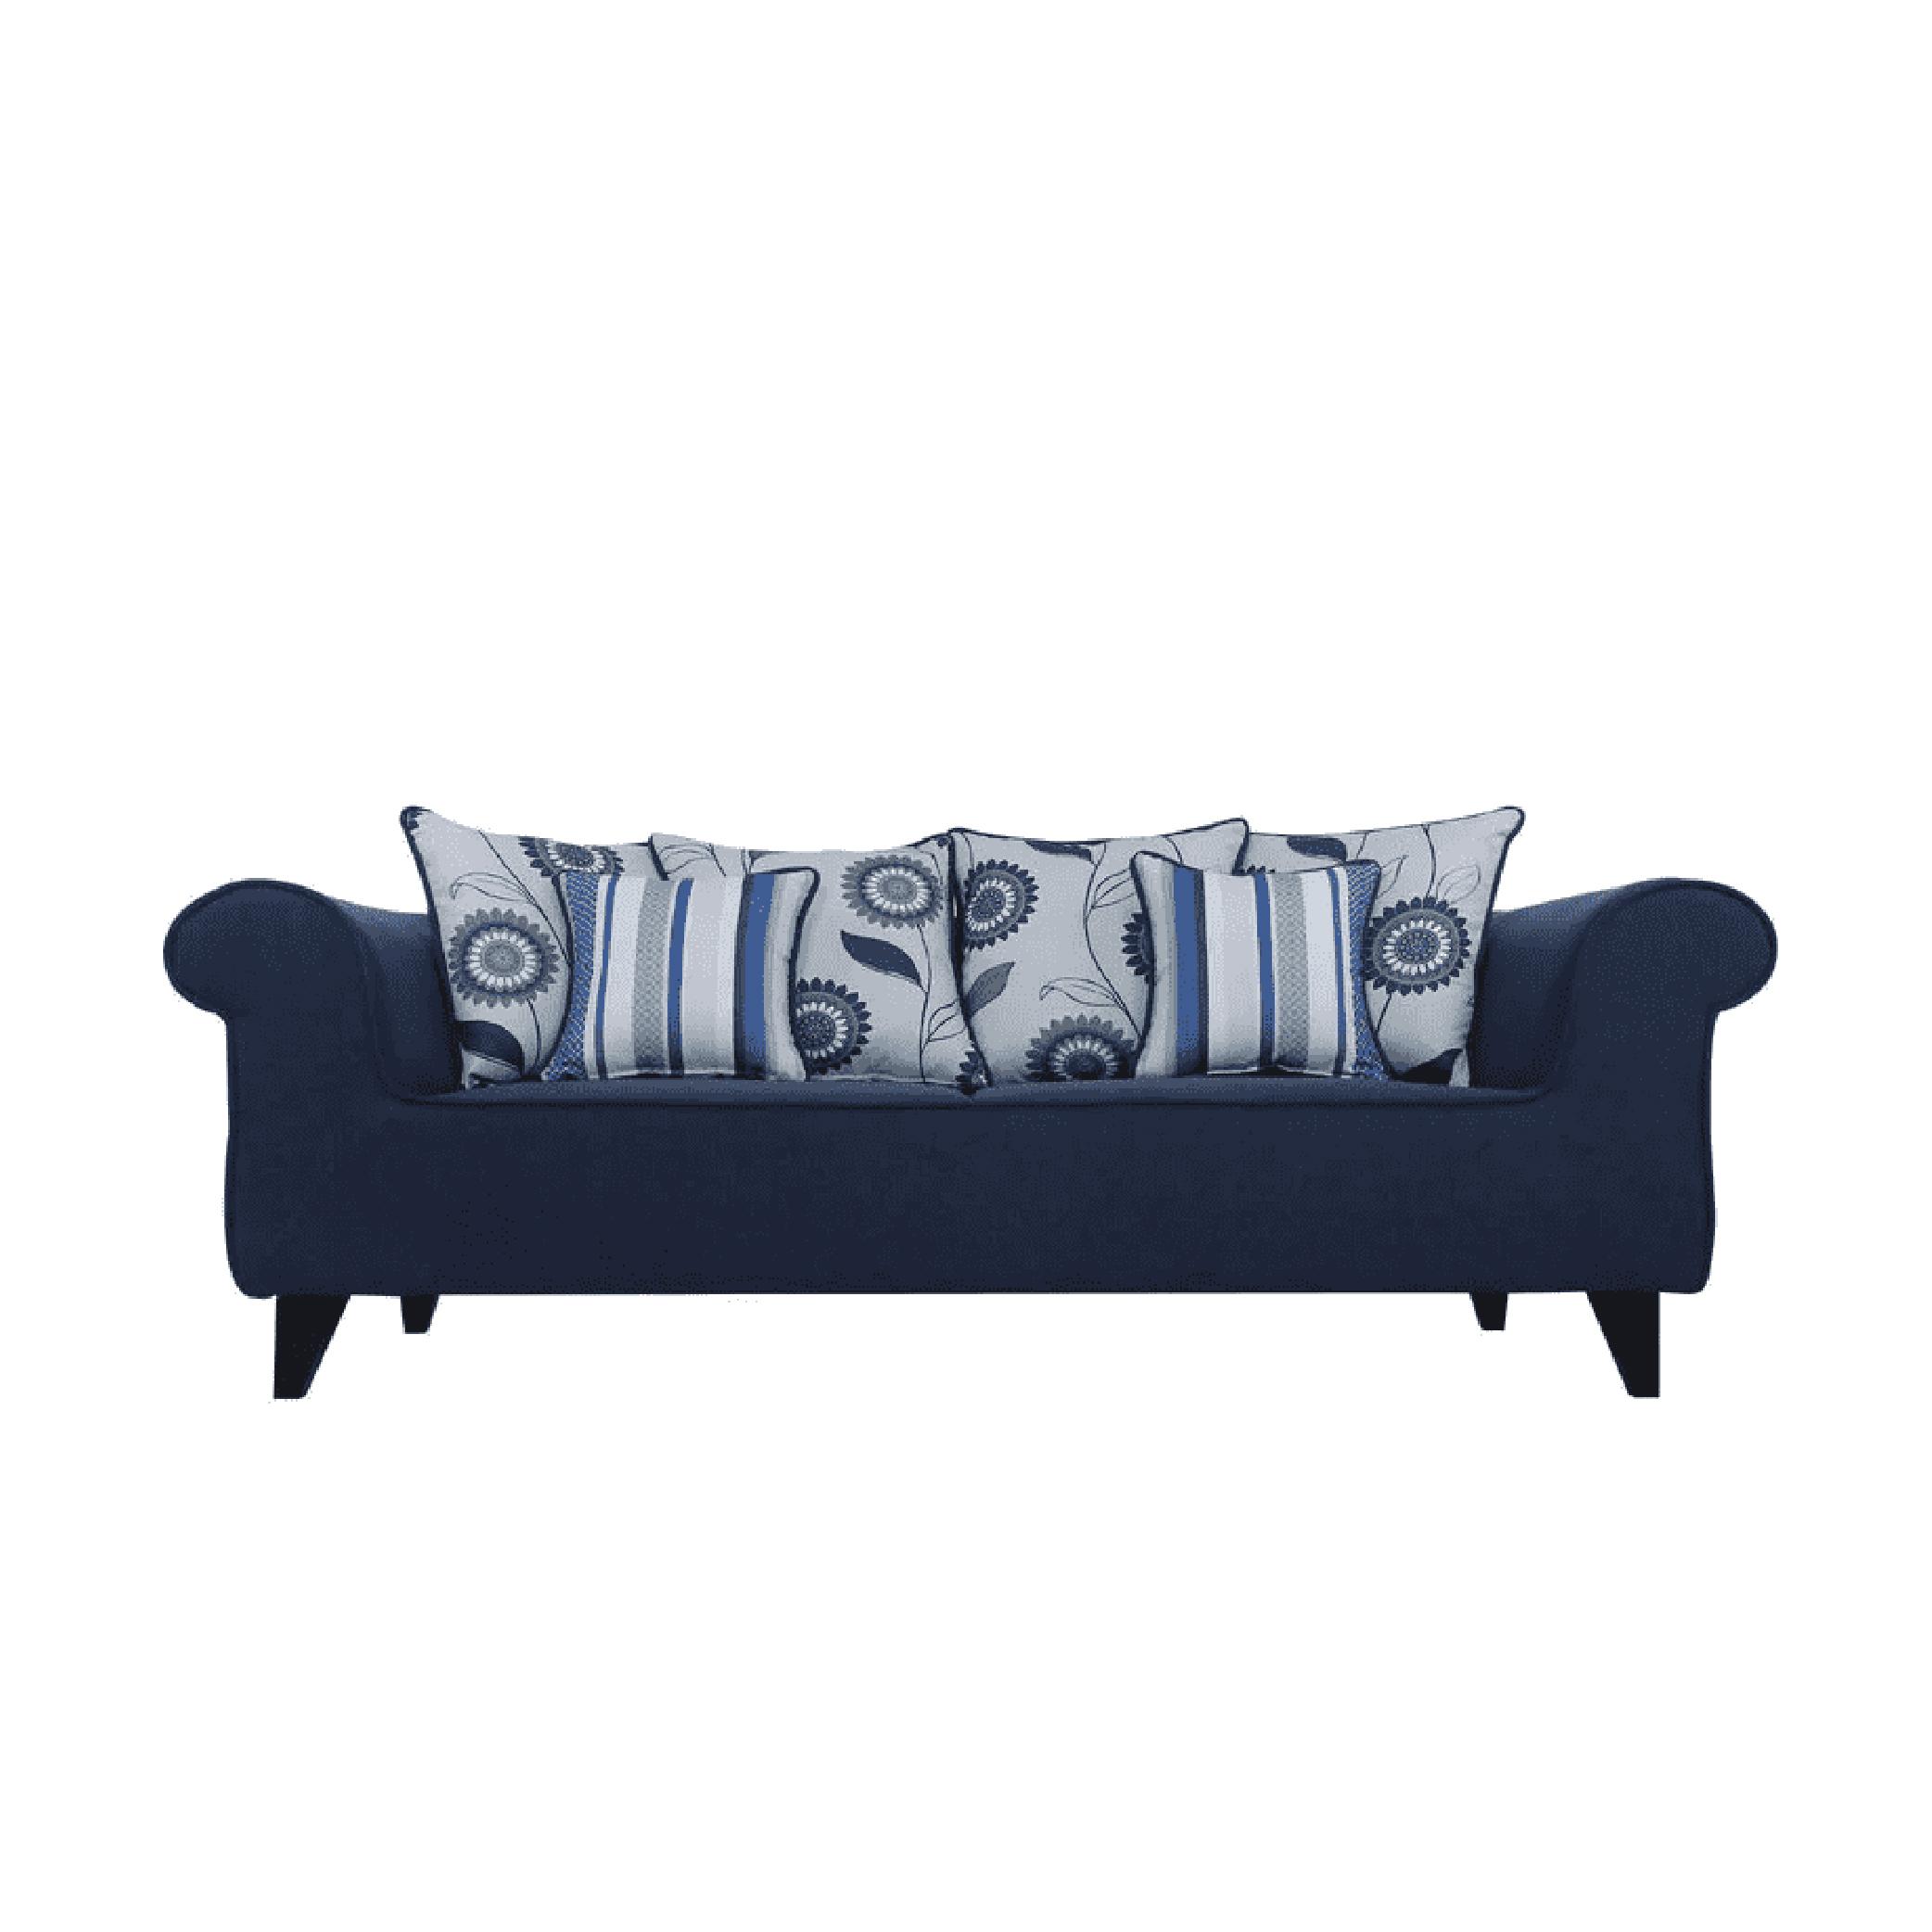 Salerno Three Seater Sofa in Navy Blue Colour